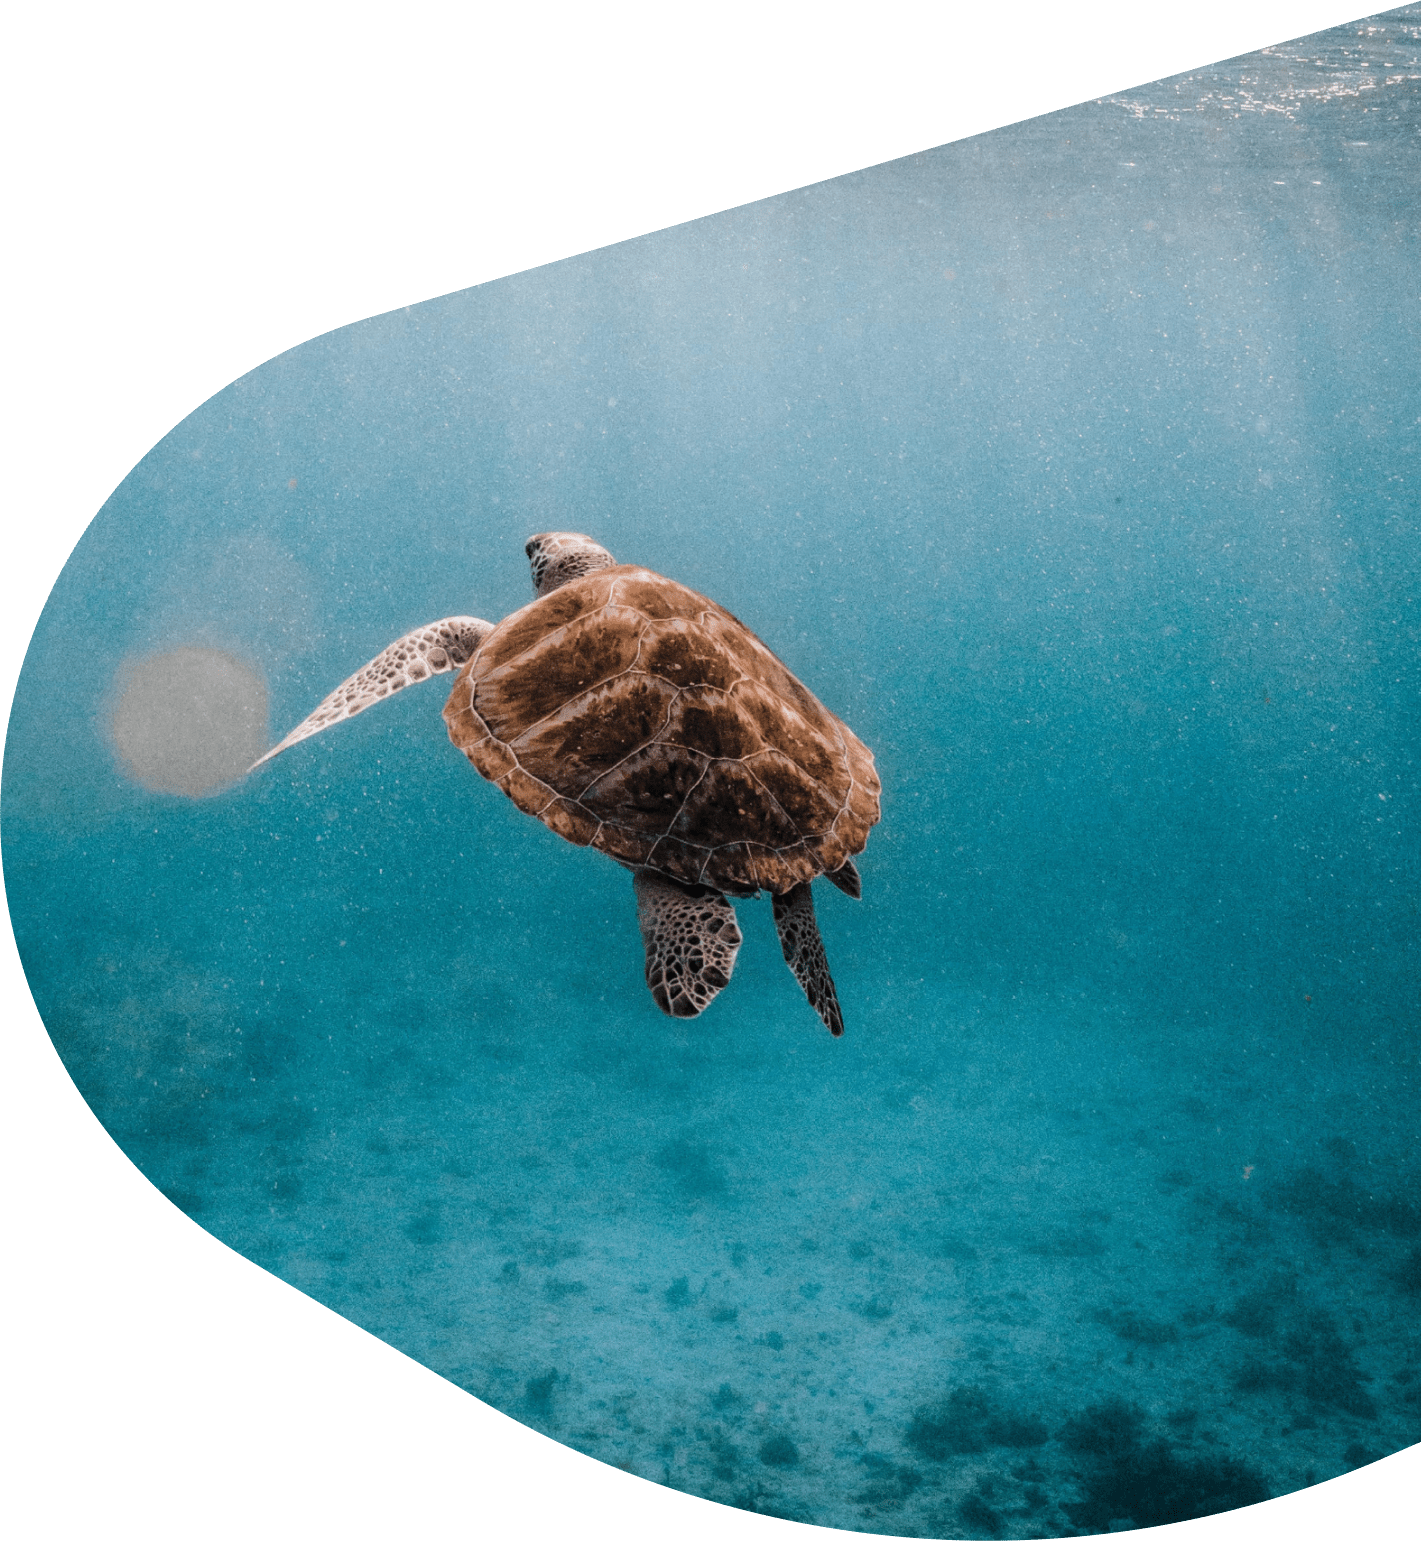 A turtle swimming in the ocean - Sea turtle